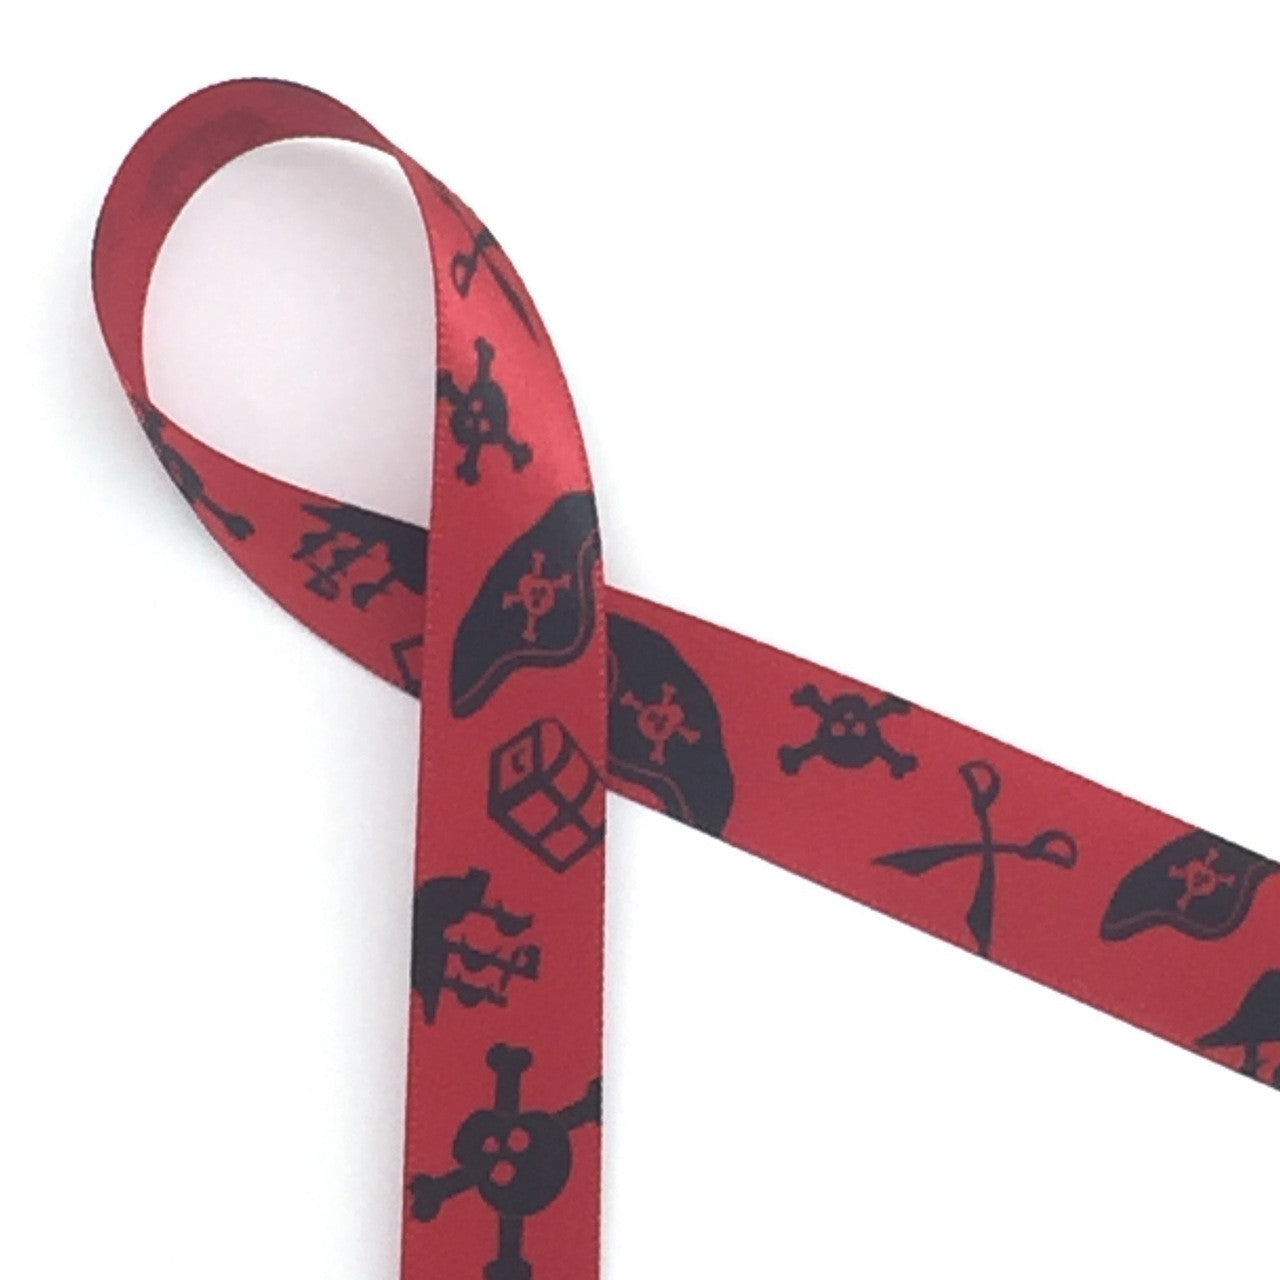 Pirate Ribbon silhouettes in black on 5/8" red single face satin ribbon